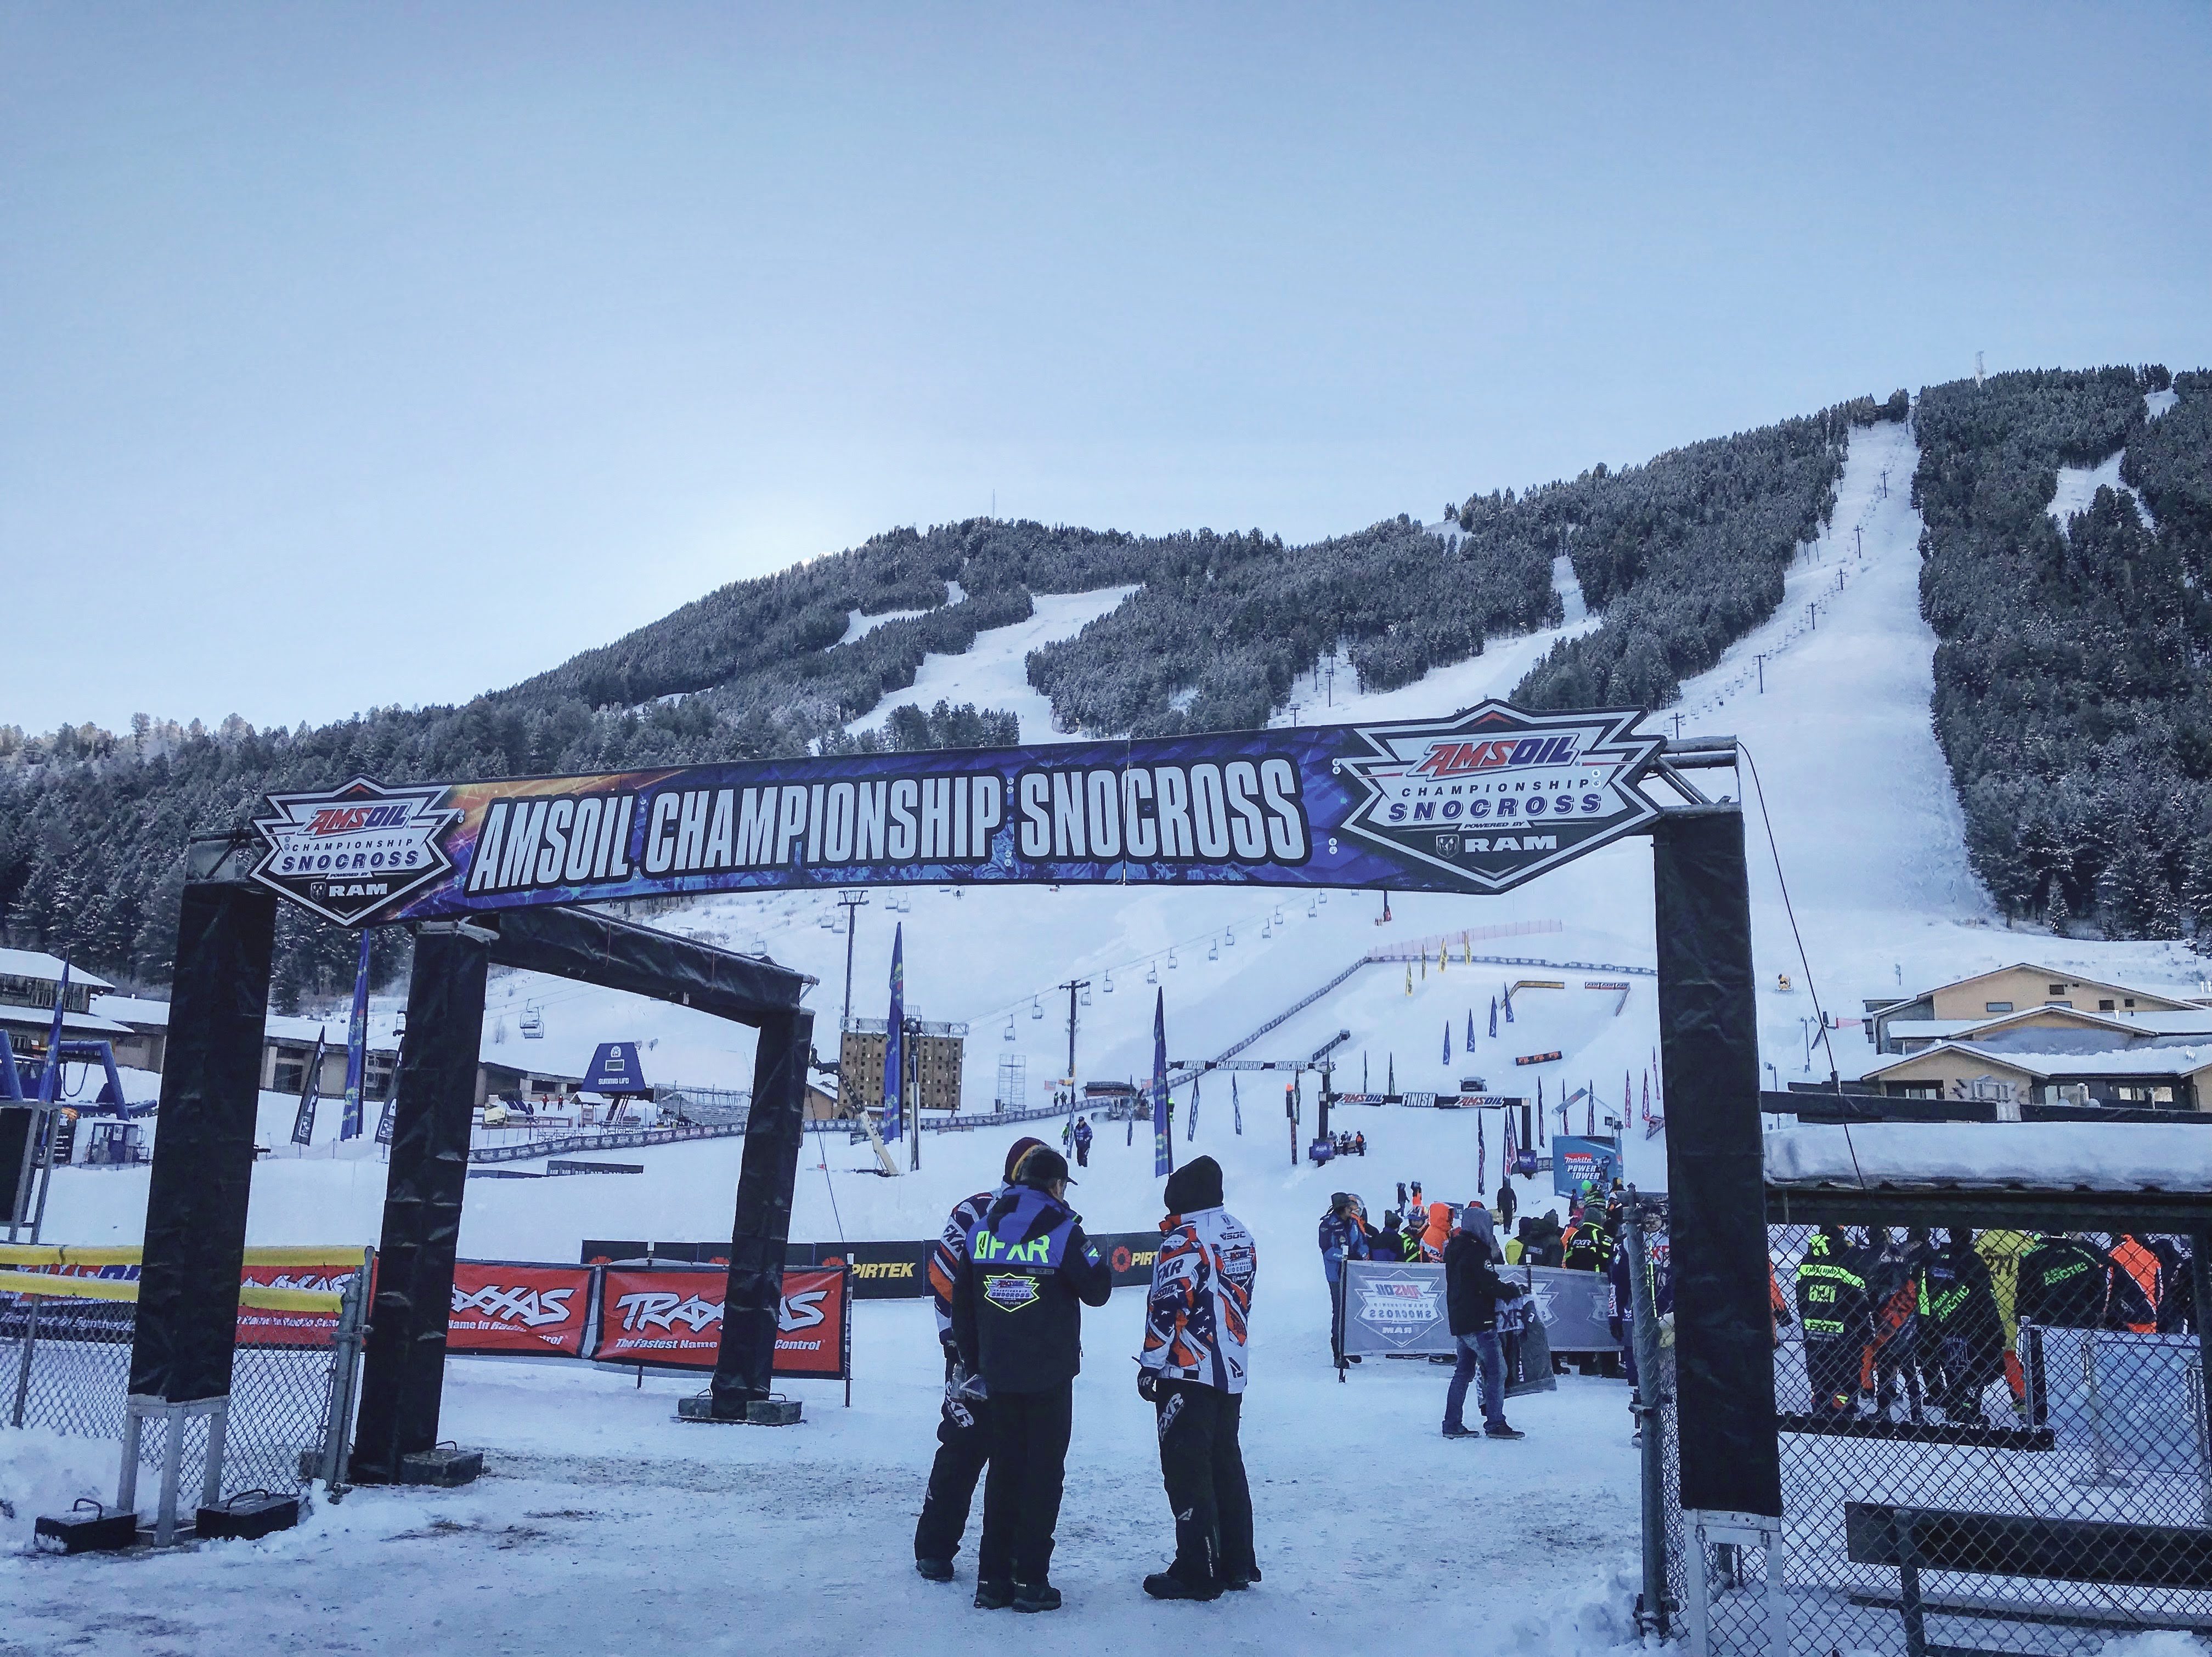 Snowmobiling for Dummies, Snocross for Experts